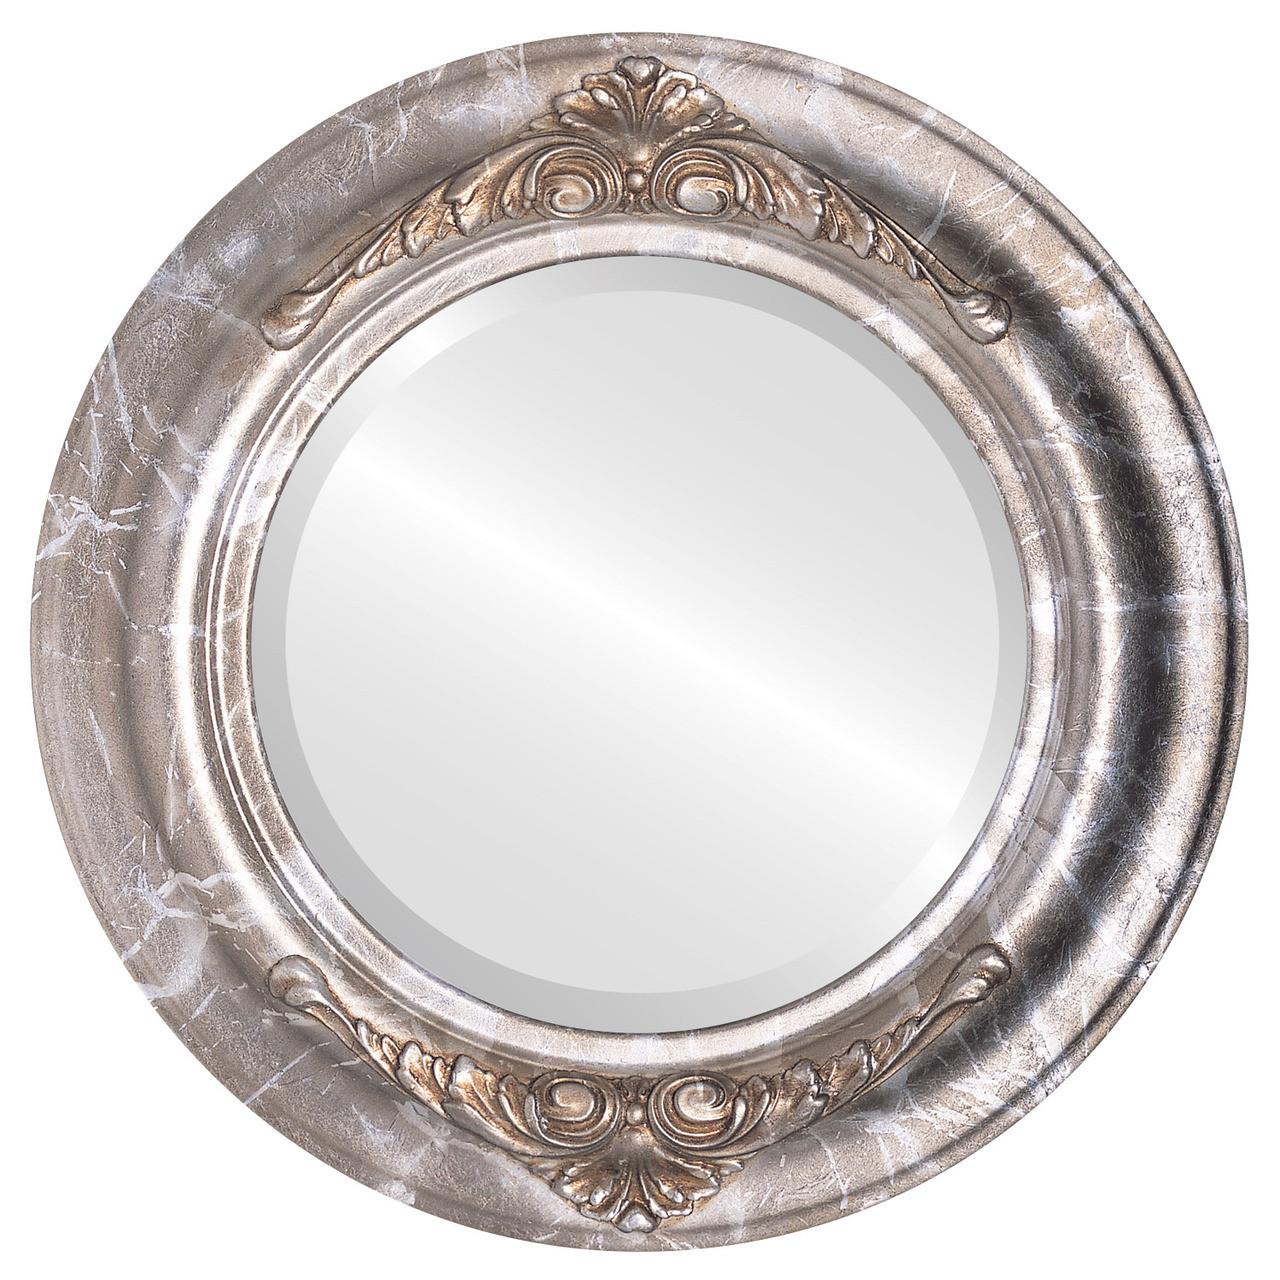 Vintage Silver Round Mirrors from $164 Free Shipping